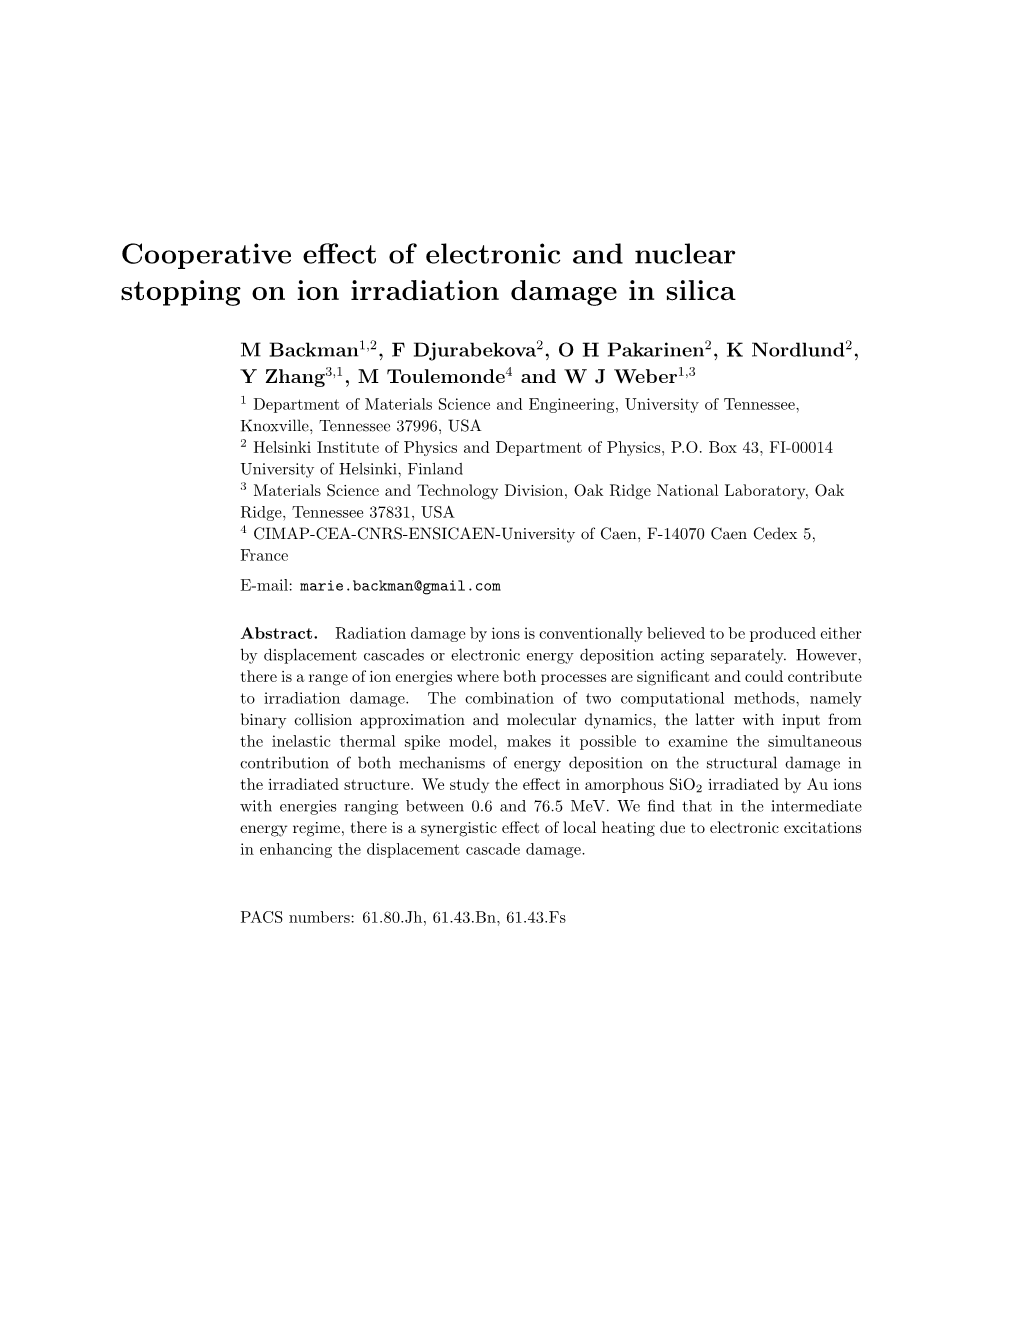 Cooperative Effect of Electronic and Nuclear Stopping on Ion Irradiation